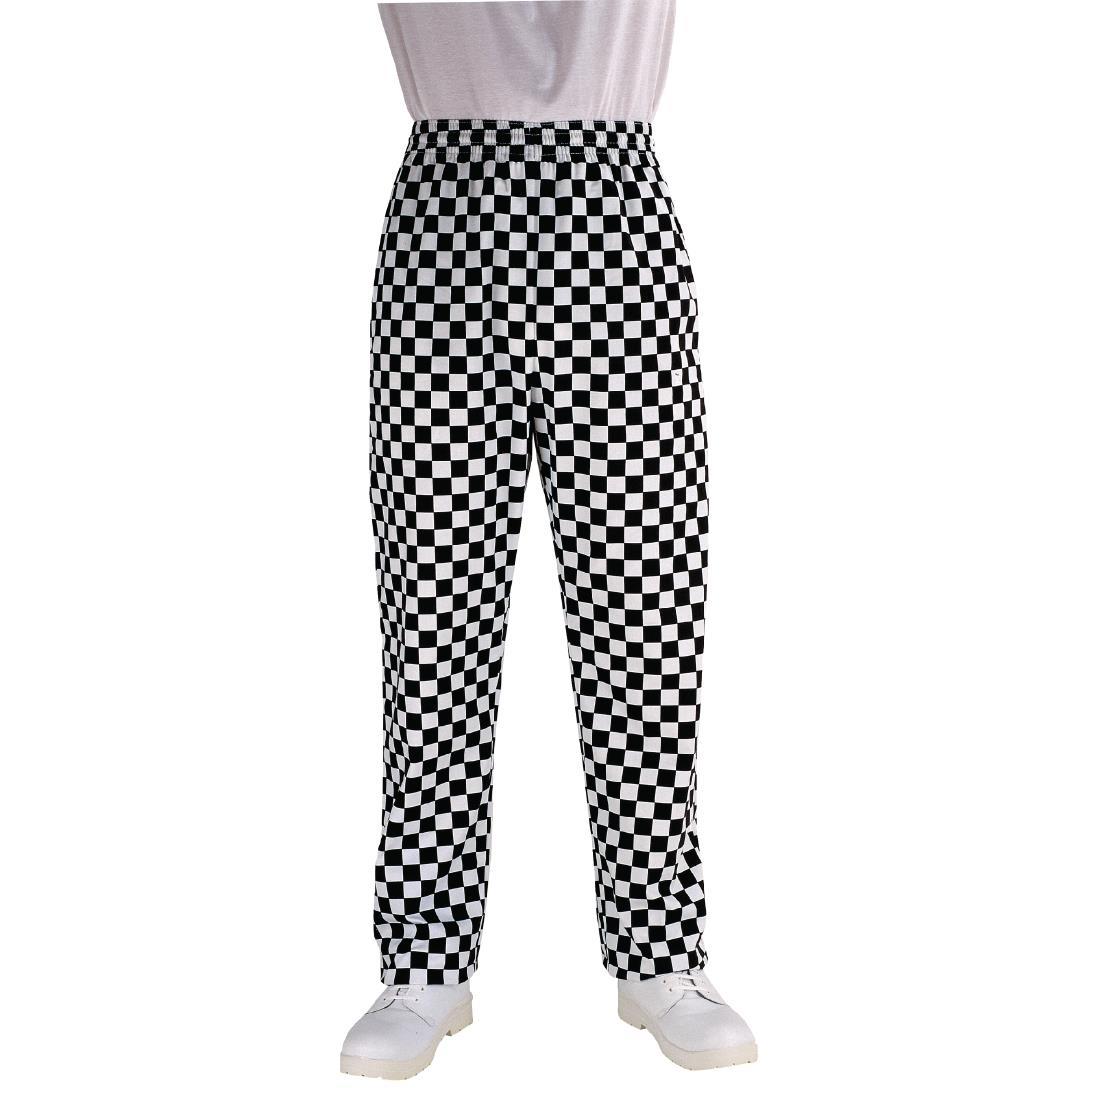 Chef Works Essential Baggy Pants Big Black Check XS